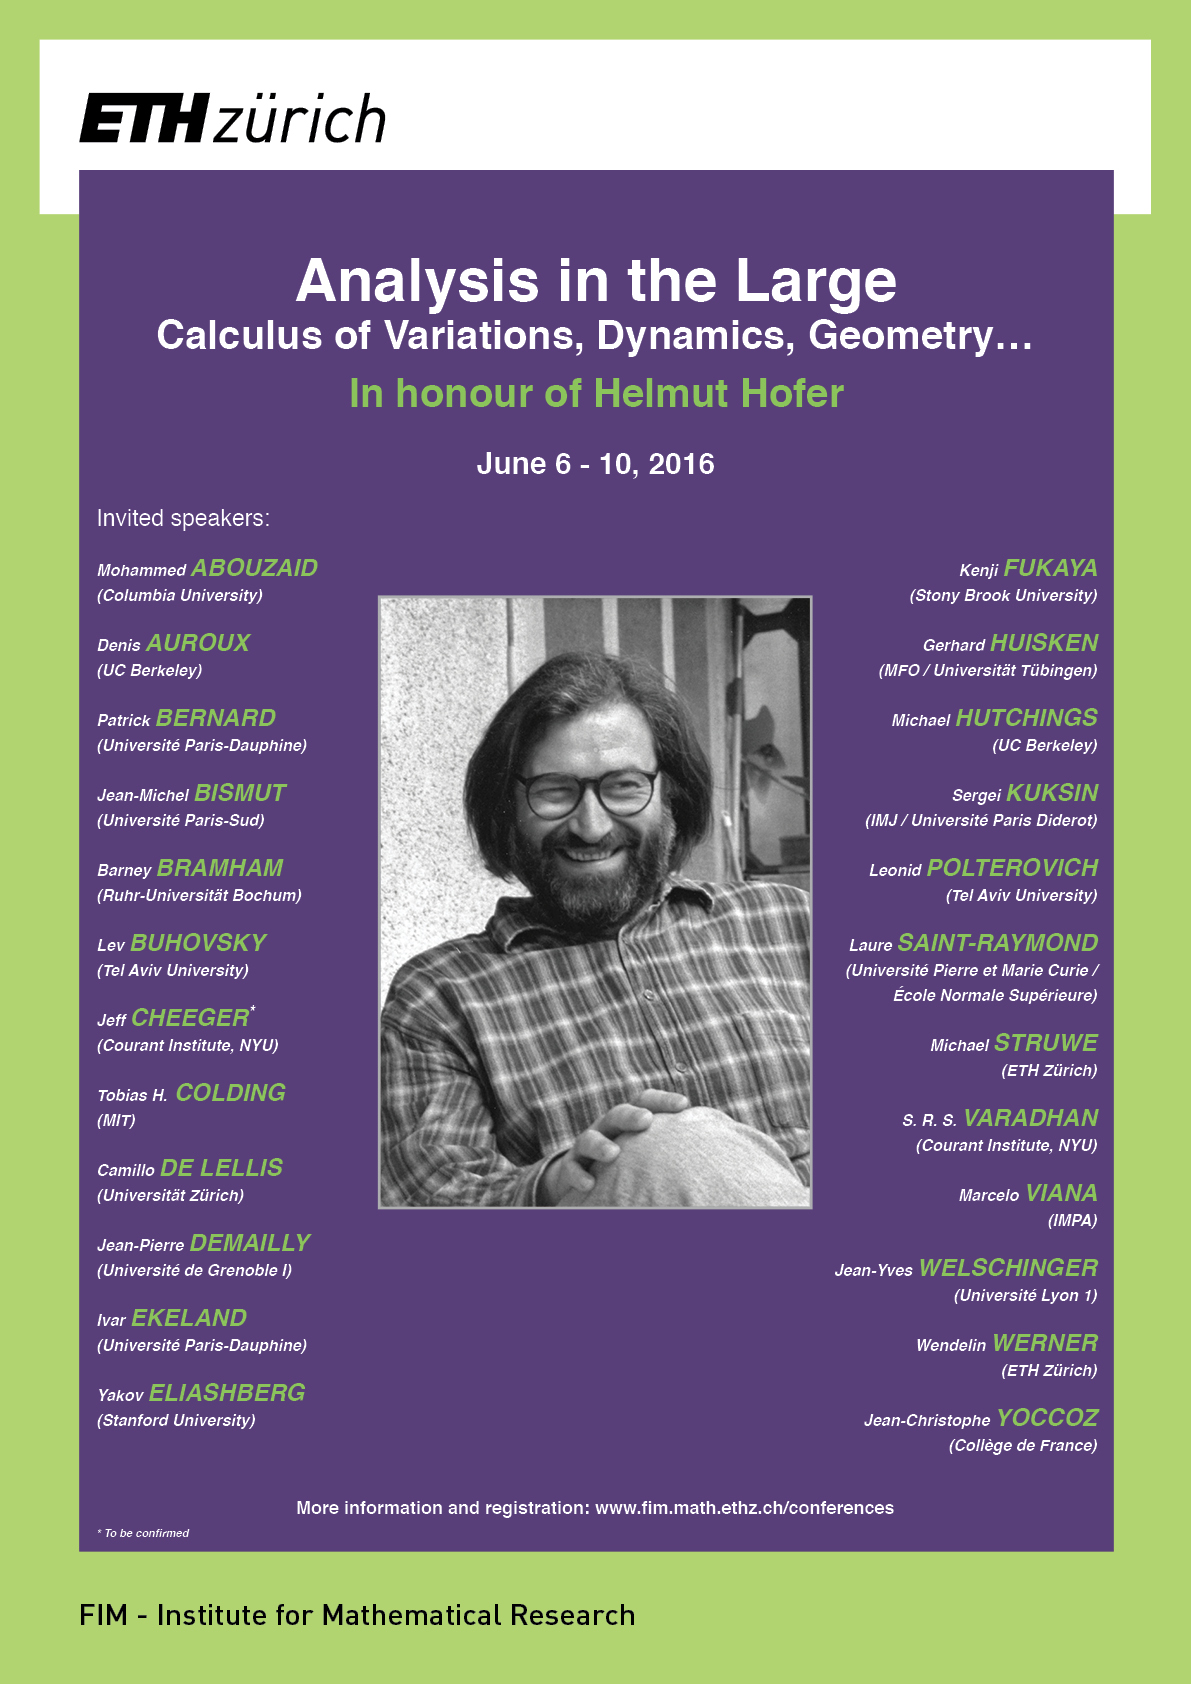 Conference poster